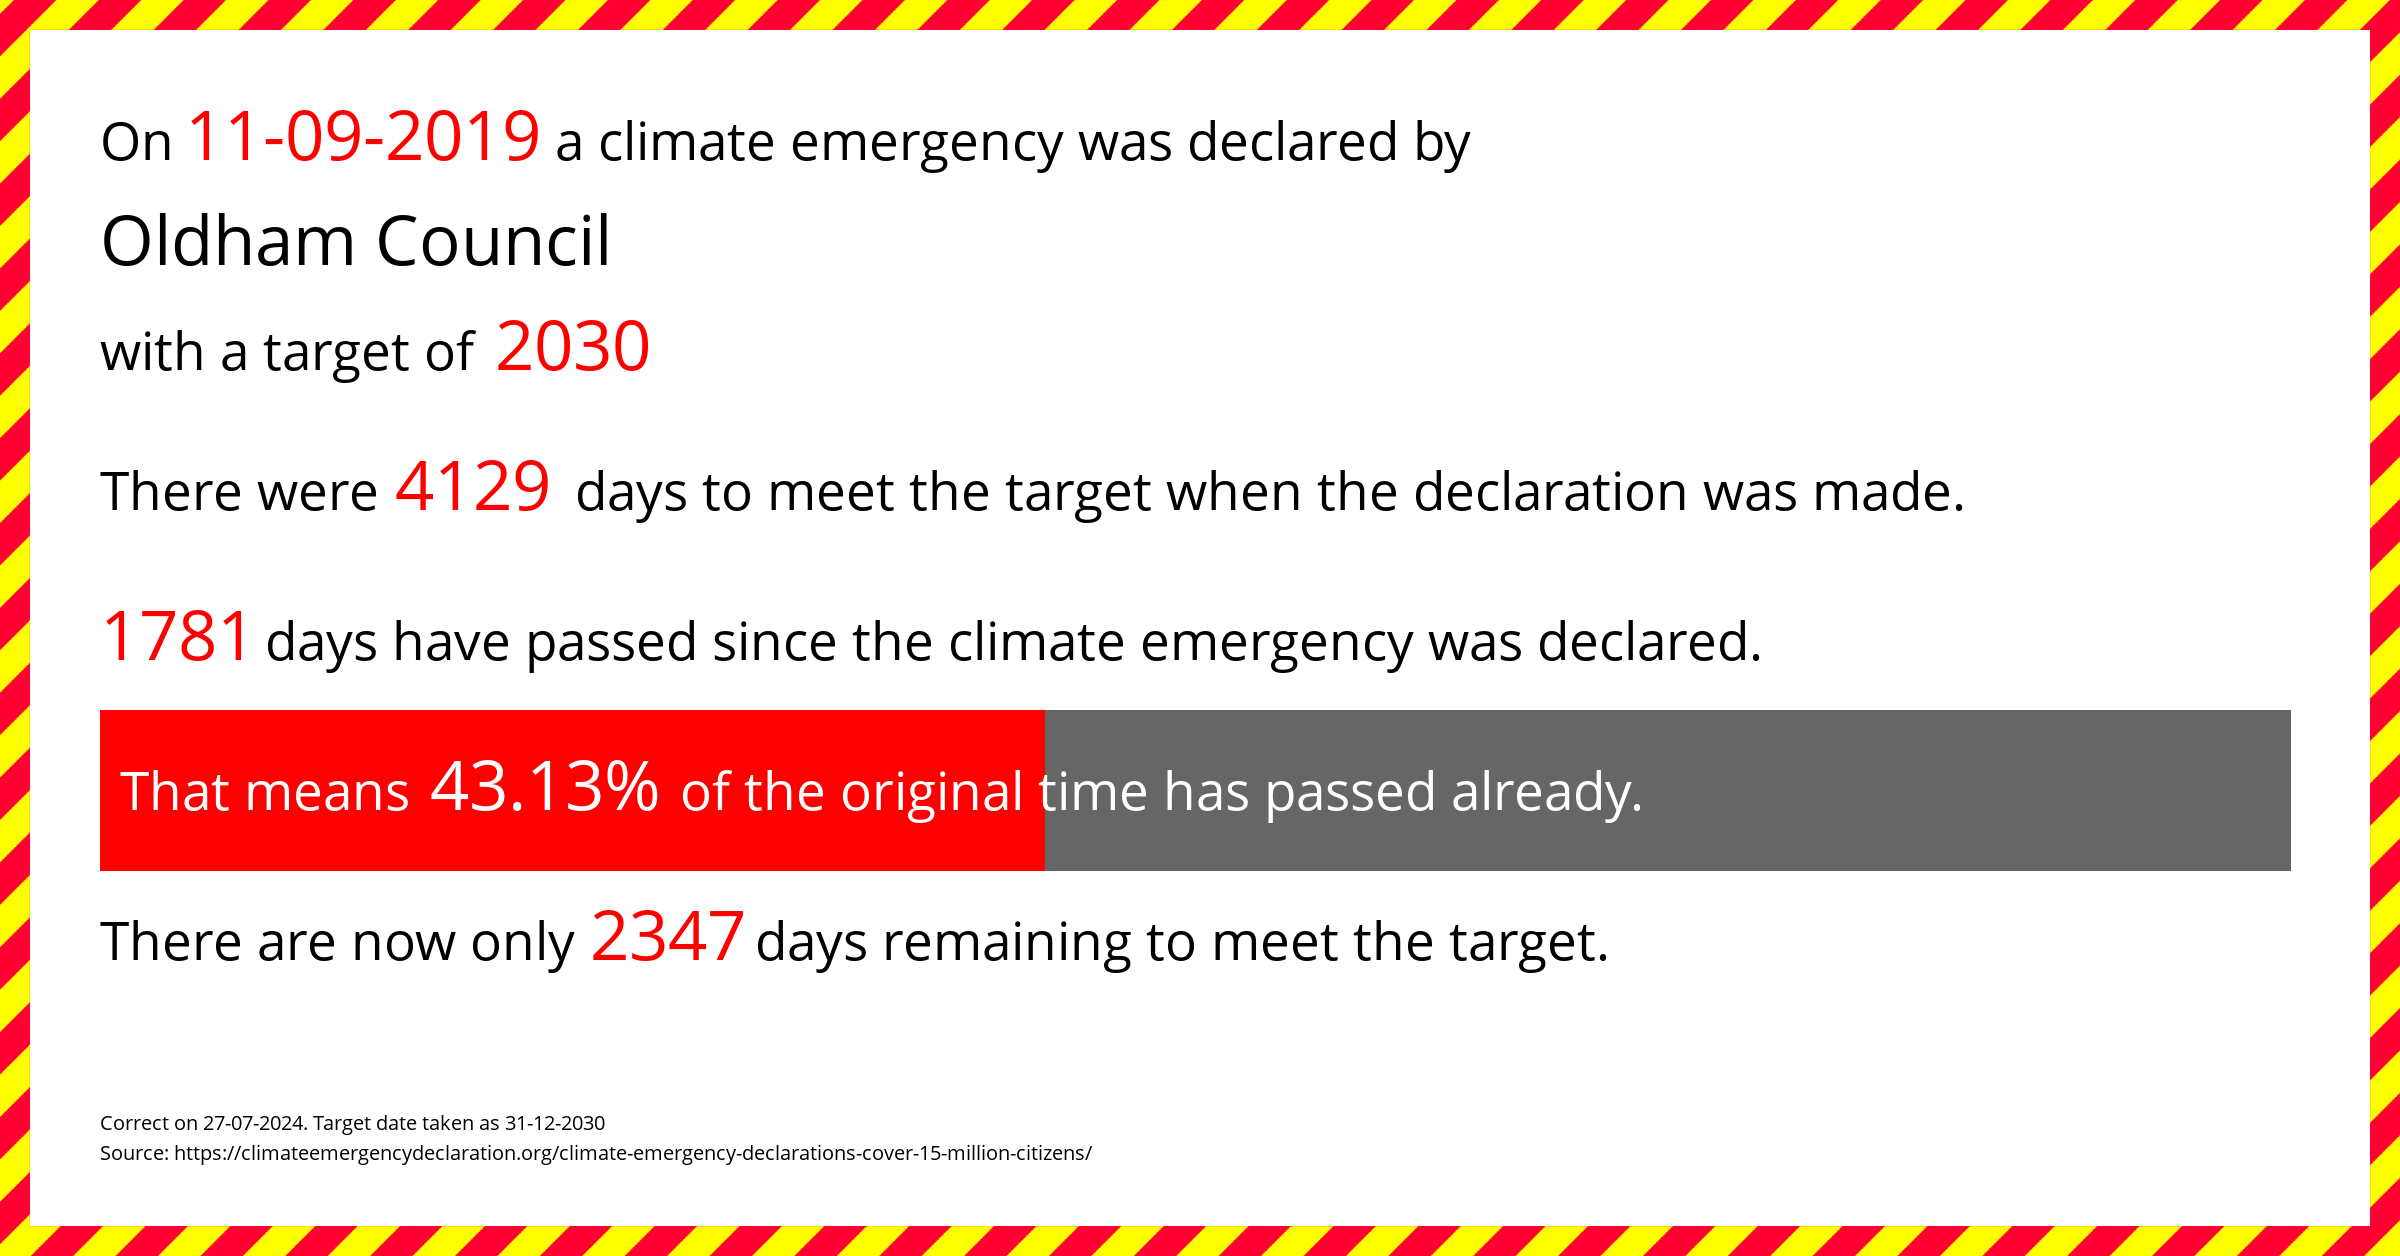 Oldham Council declared a Climate emergency on Wednesday 11th September 2019, with a target of 2030.